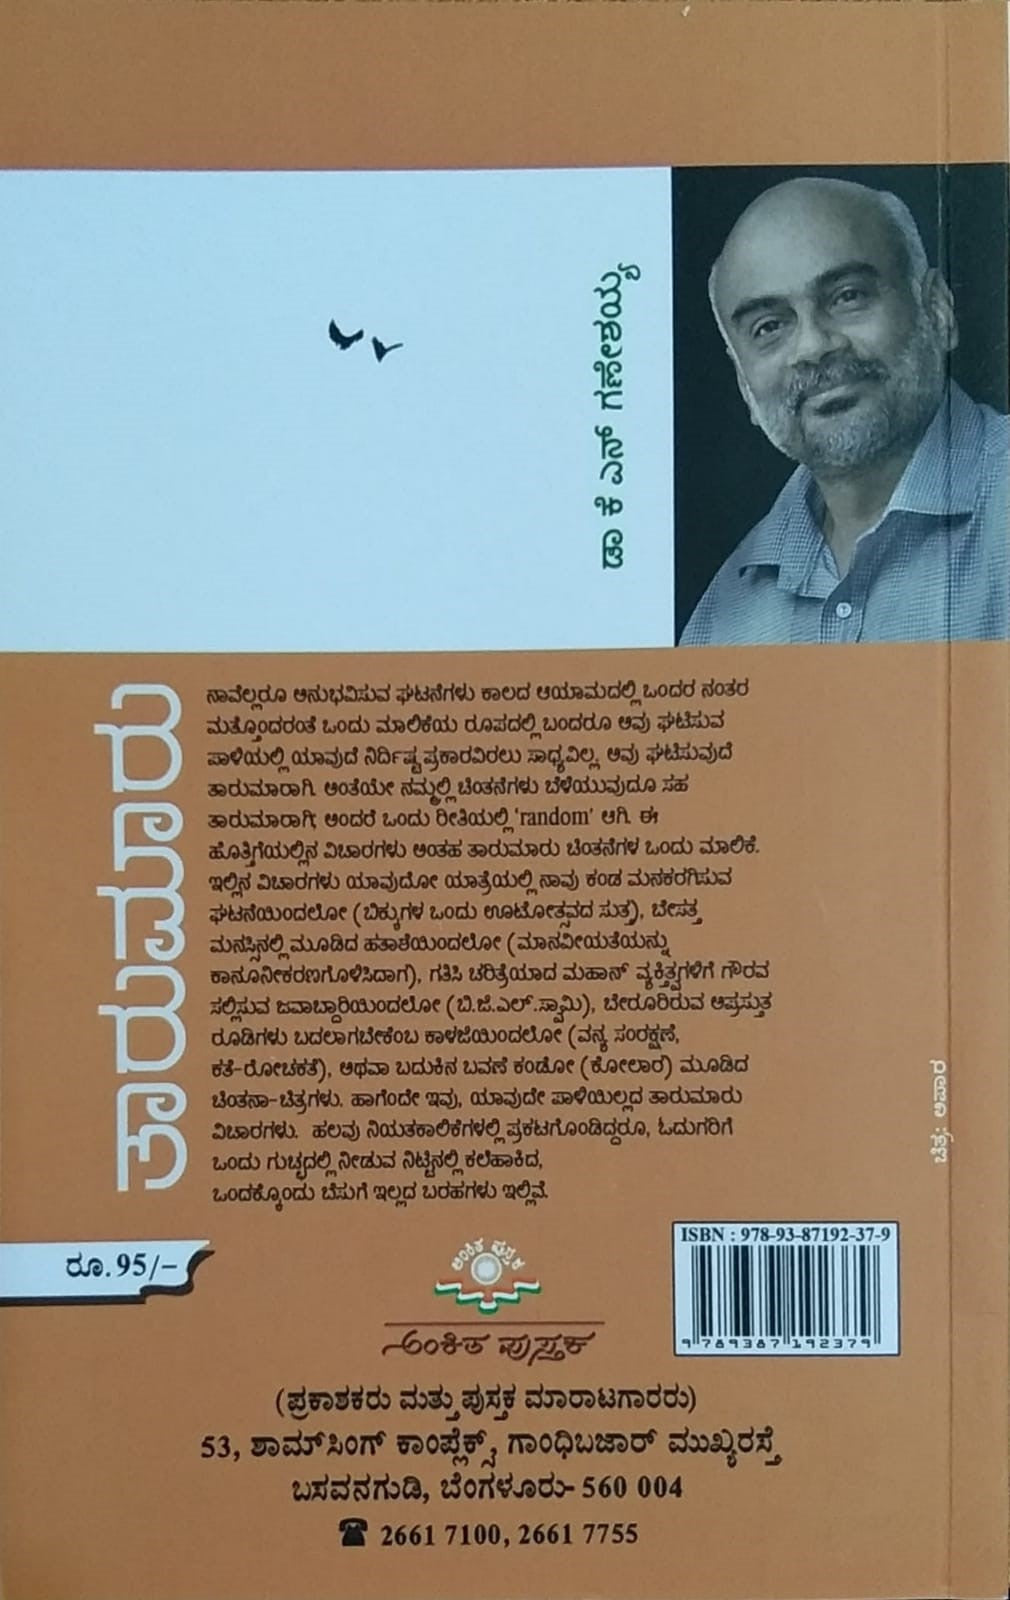 'Taarumaaru' is a book of Collection of Articles written by Dr. K. N. Ganeshayya and Published by Ankita Pustaka